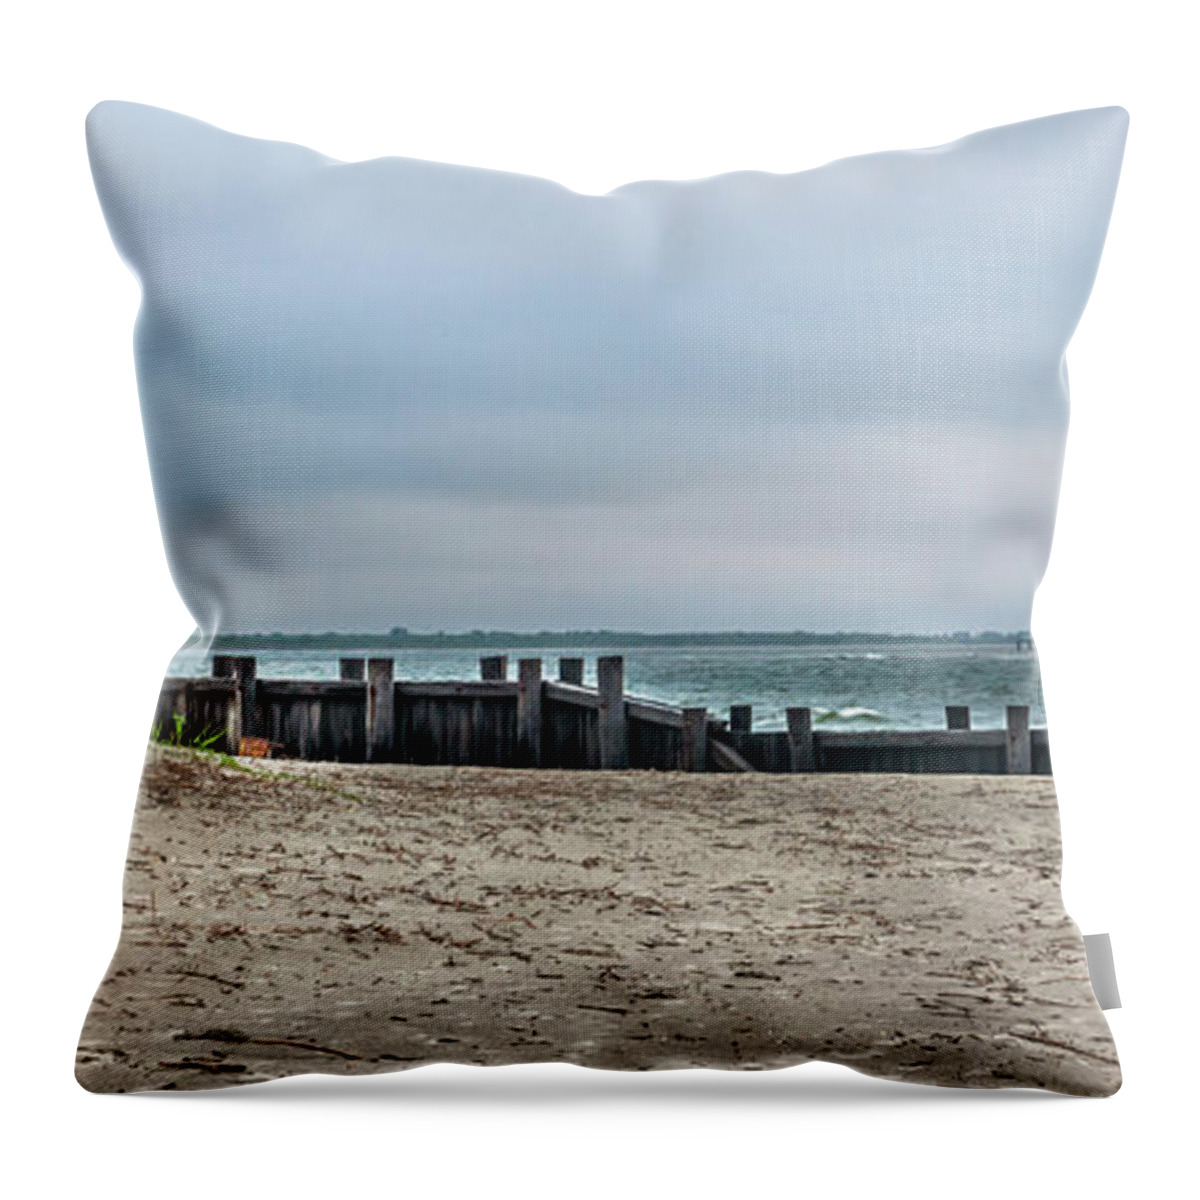 Morris Island Lighthouse Throw Pillow featuring the photograph Nautical Shore - Morris Island Lighthouse by Dale Powell